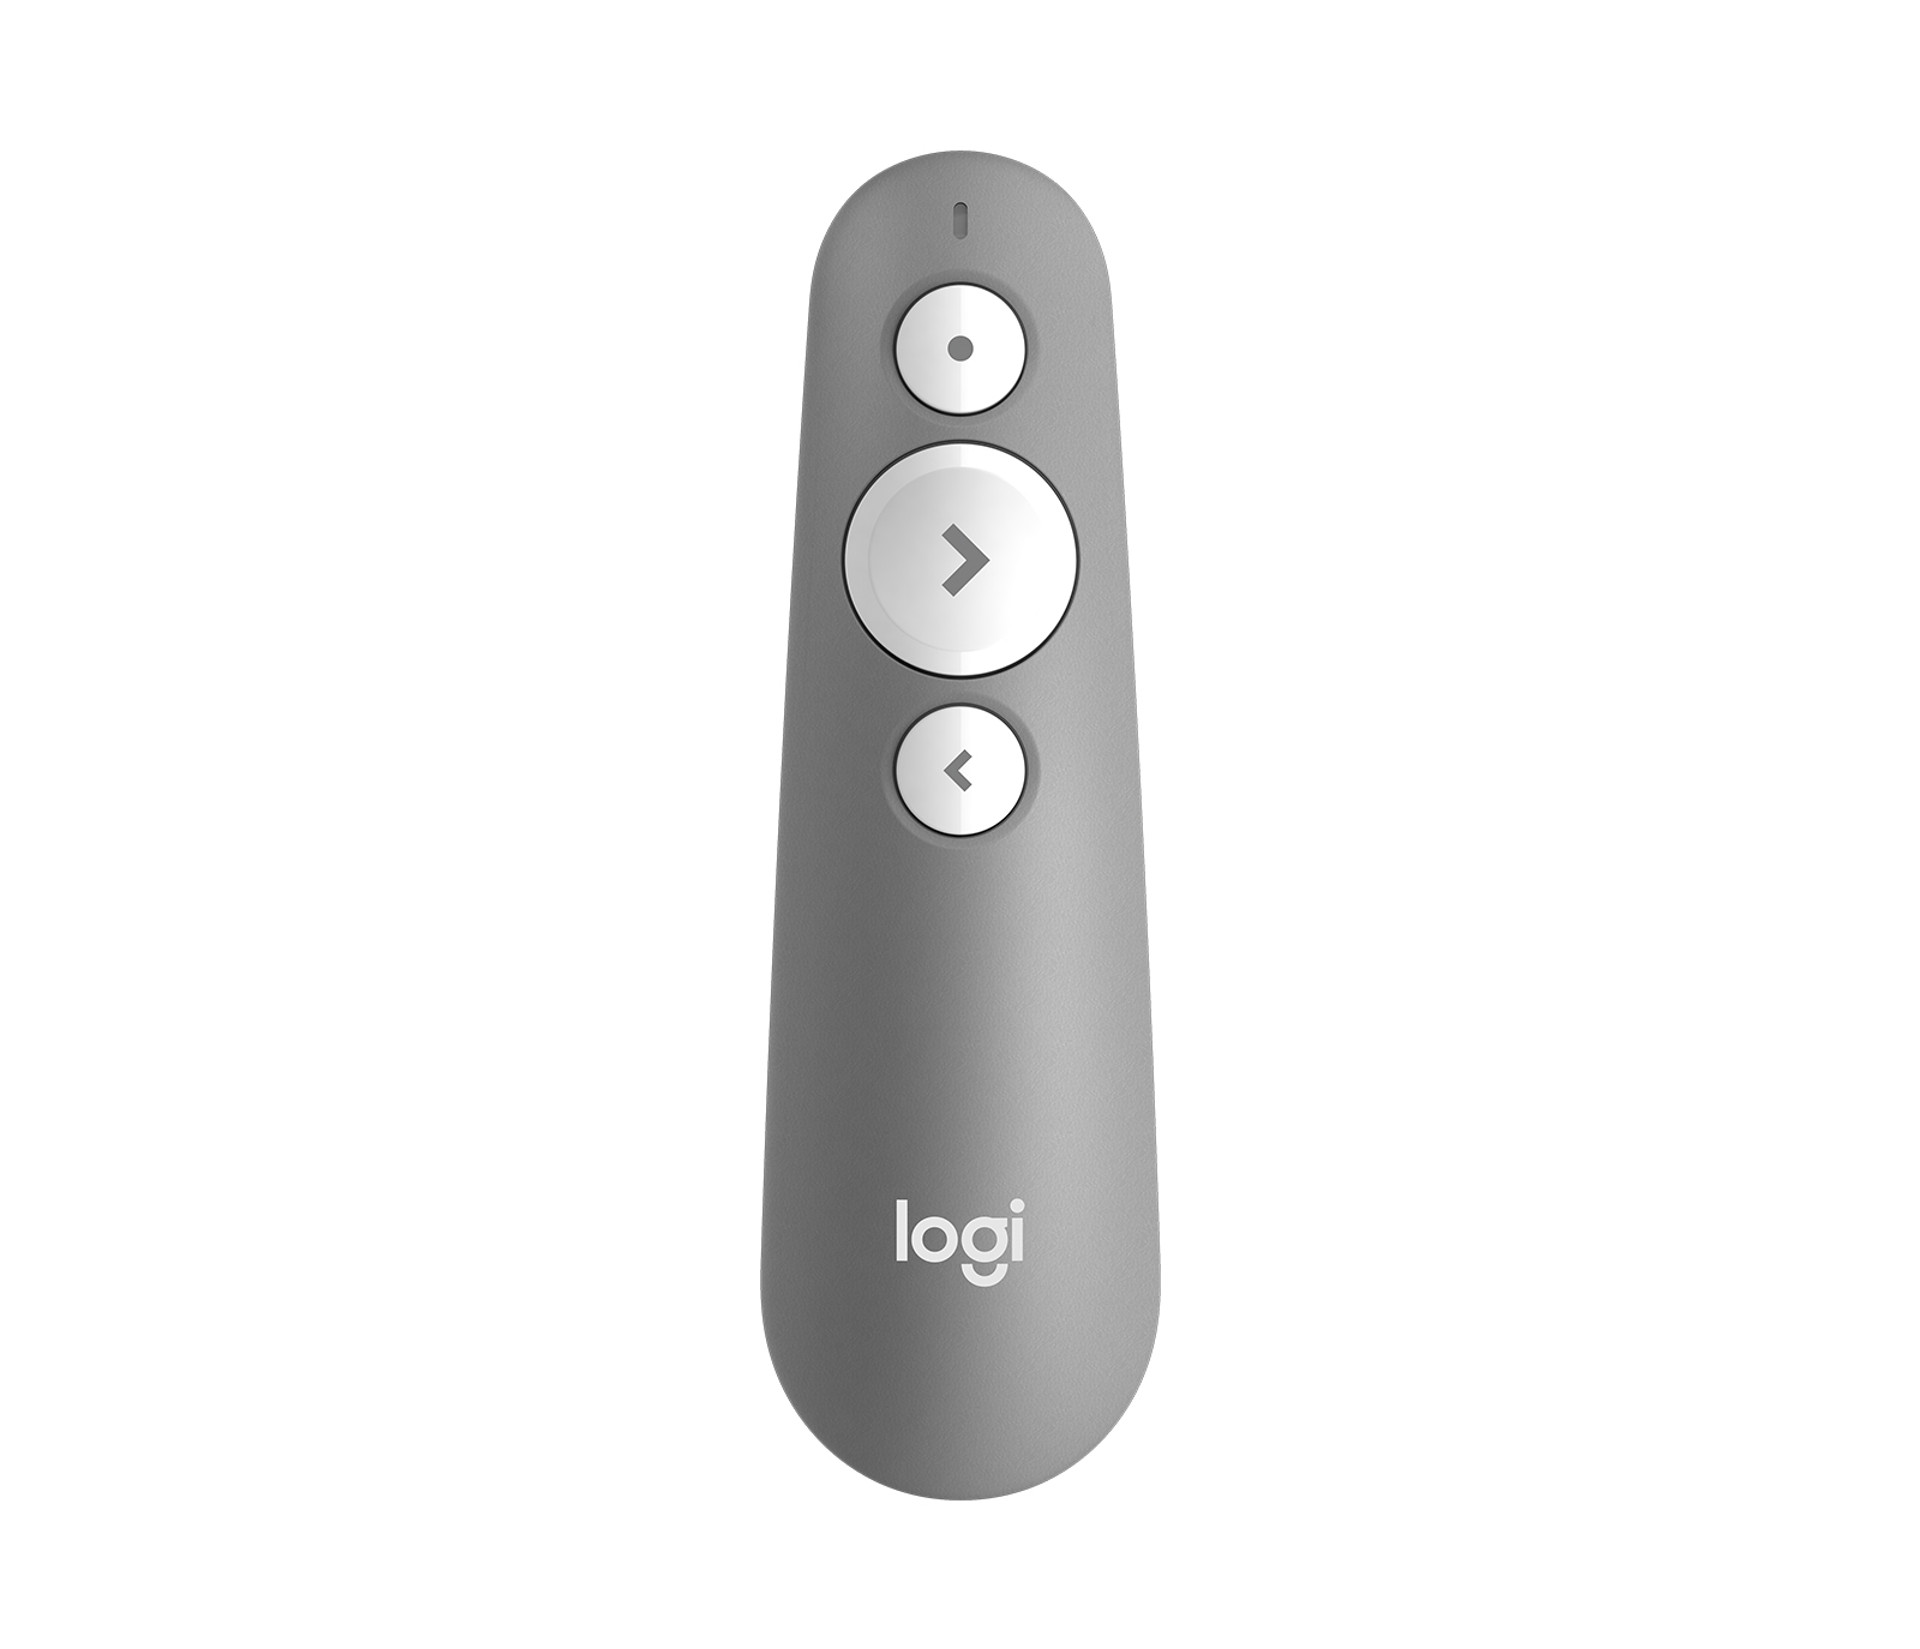 Logitech R500S Laser Presentation Remote with Dual Connectivity Bluetooth or USB 20m Range Red Laser Pointer for PowerPoint Keynote Mid Grey